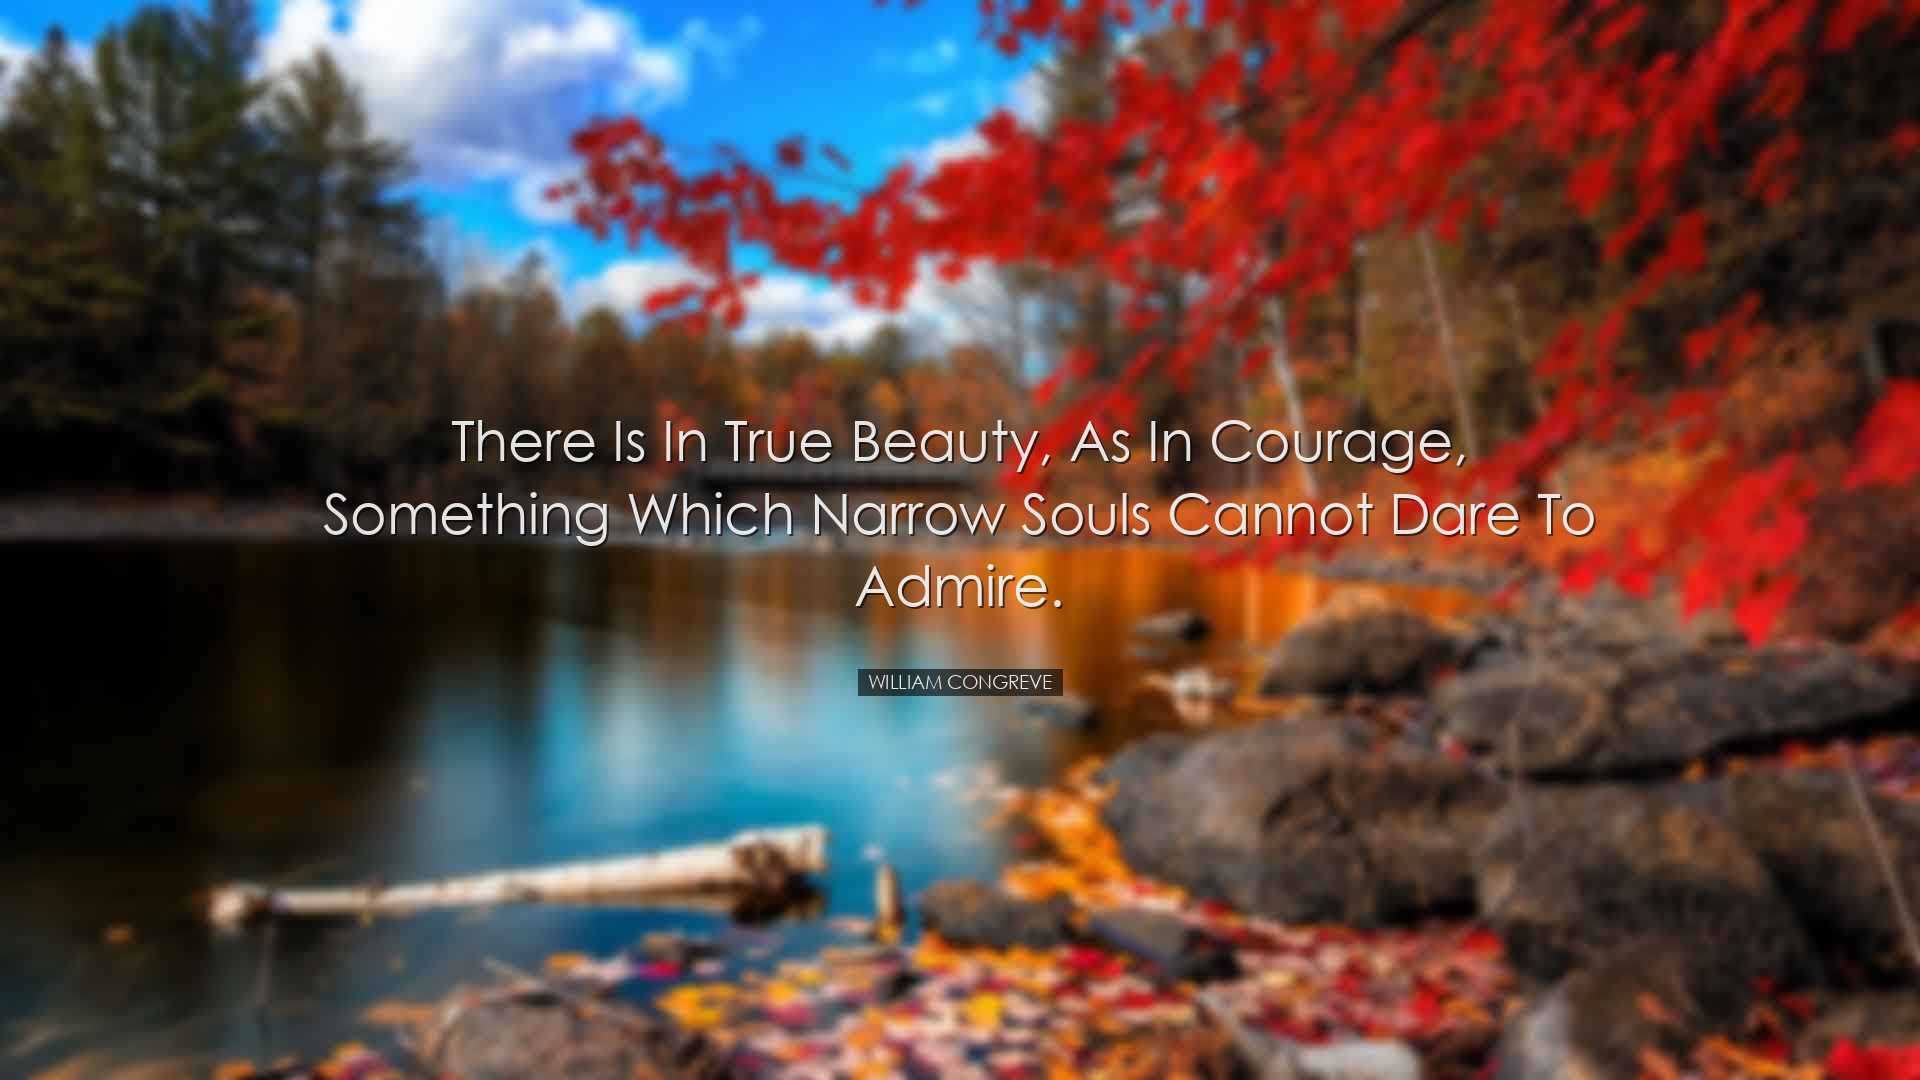 There is in true beauty, as in courage, something which narrow sou